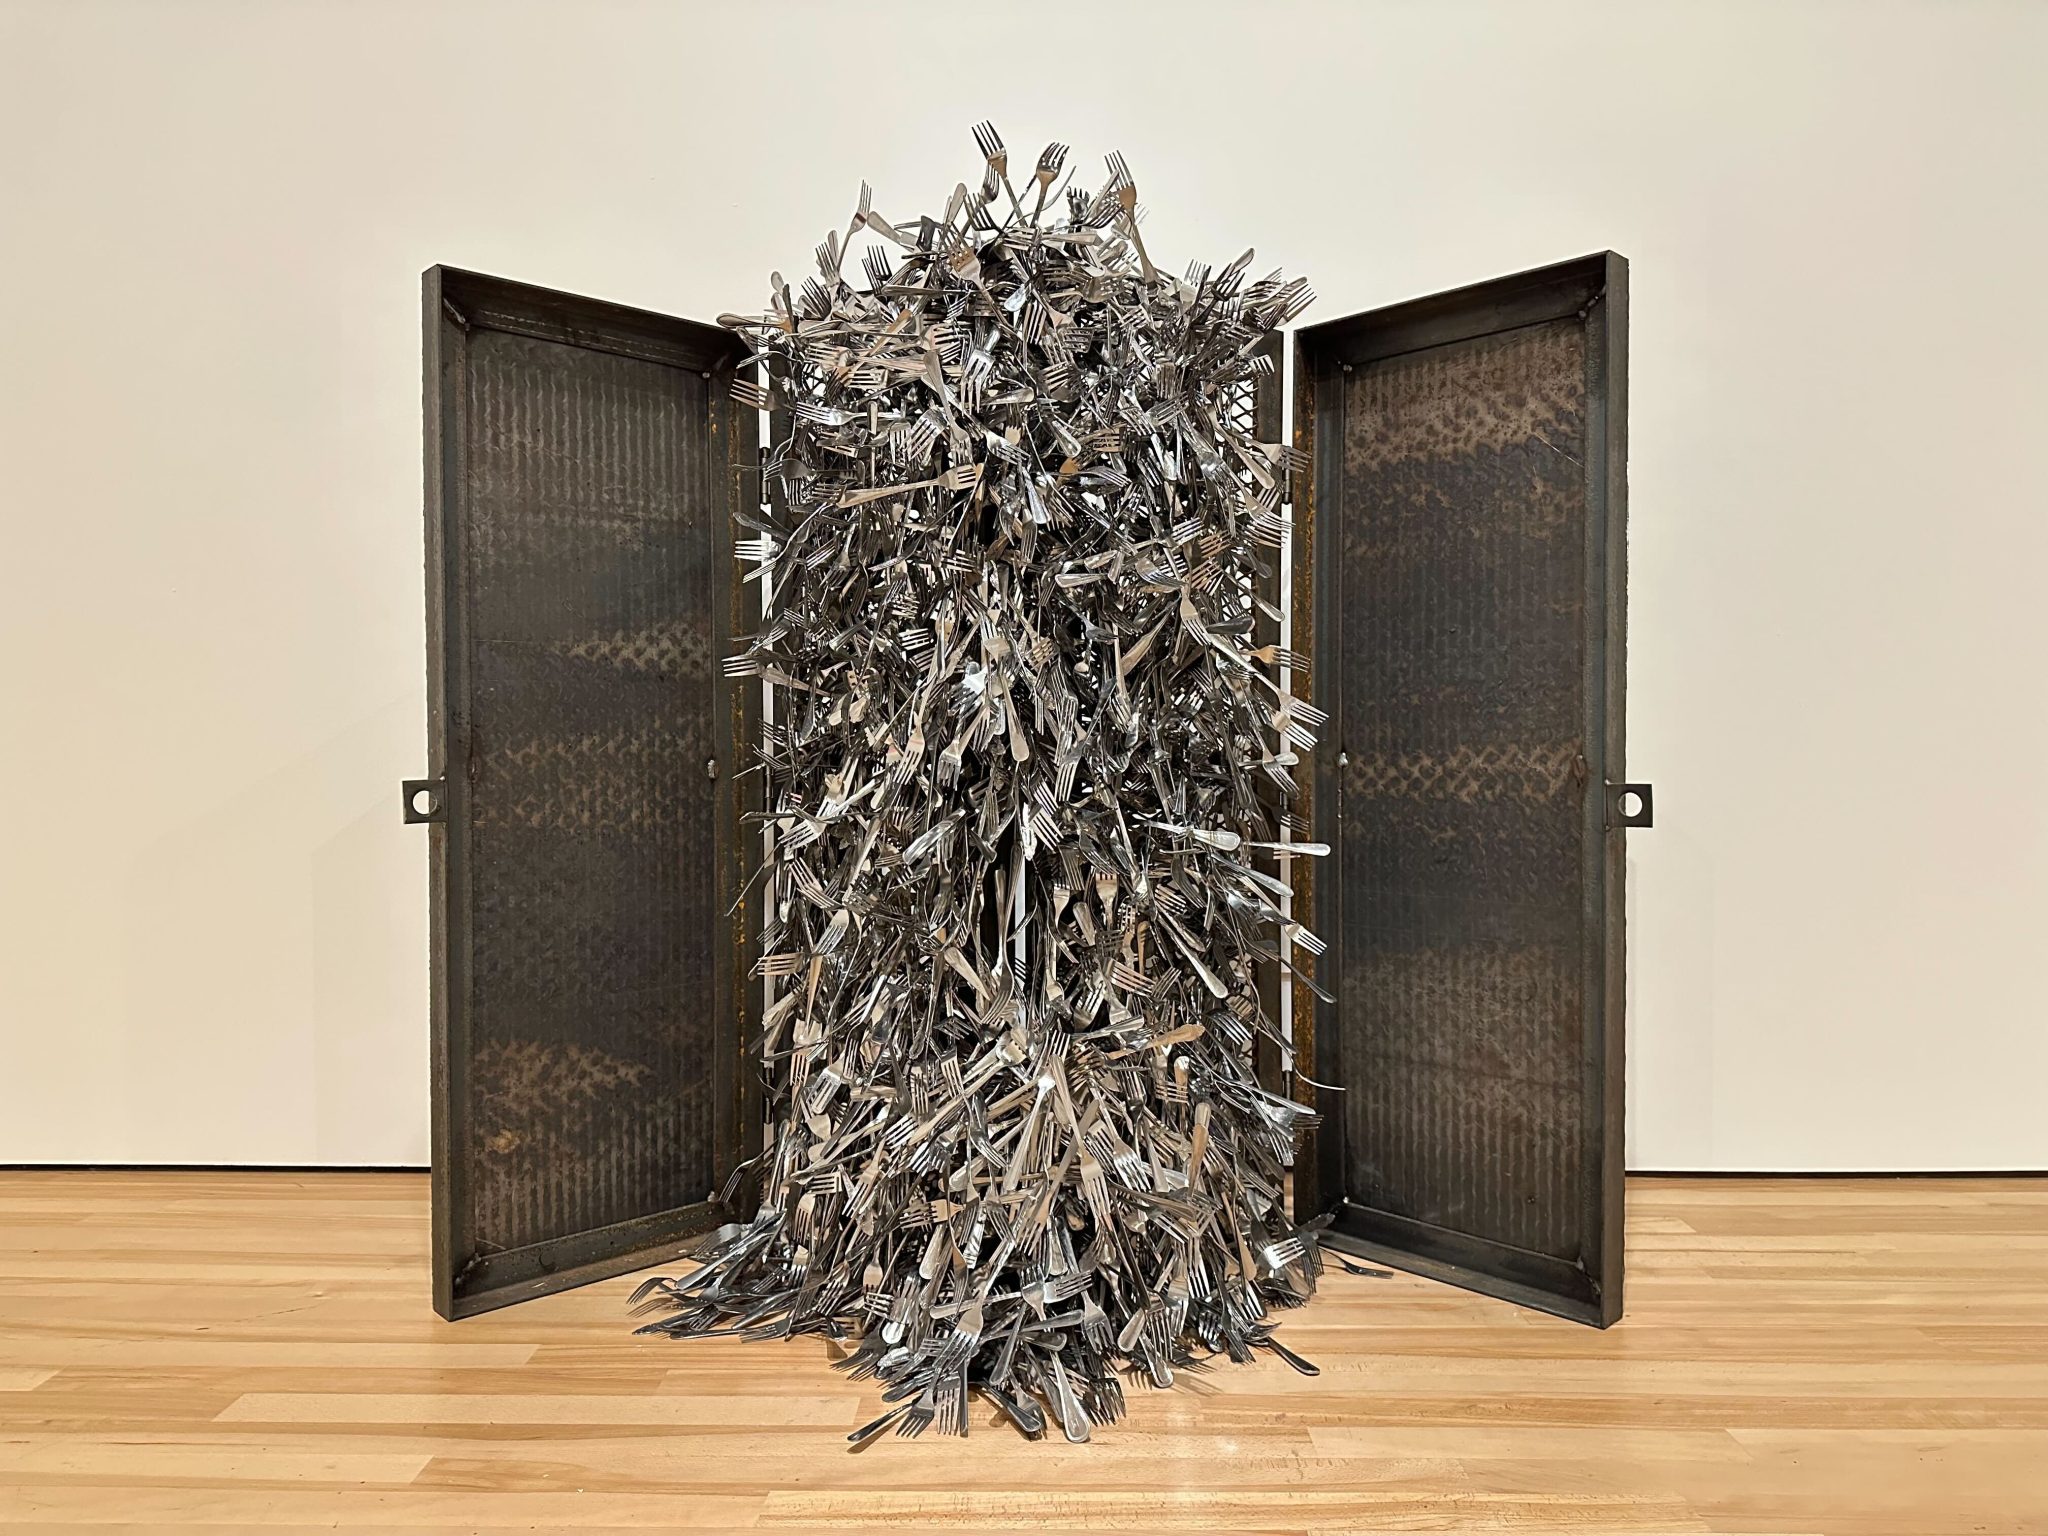 A metal artwork constructed of 3 panels. The center panel is completely covered with metal forks which are stuck on magnets